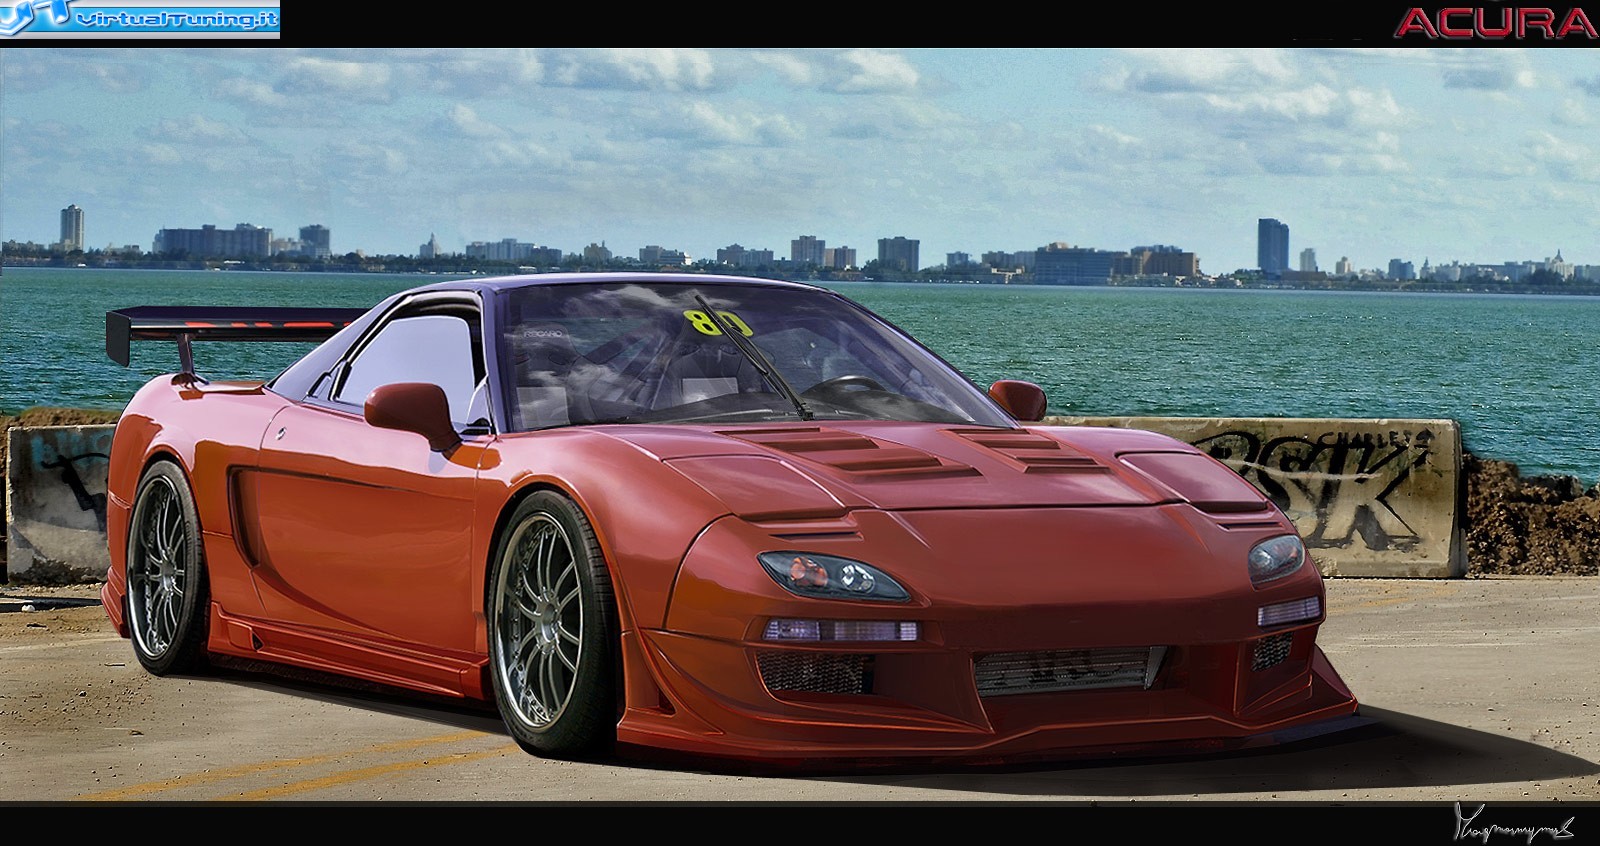 VirtualTuning ACURA NSX by 